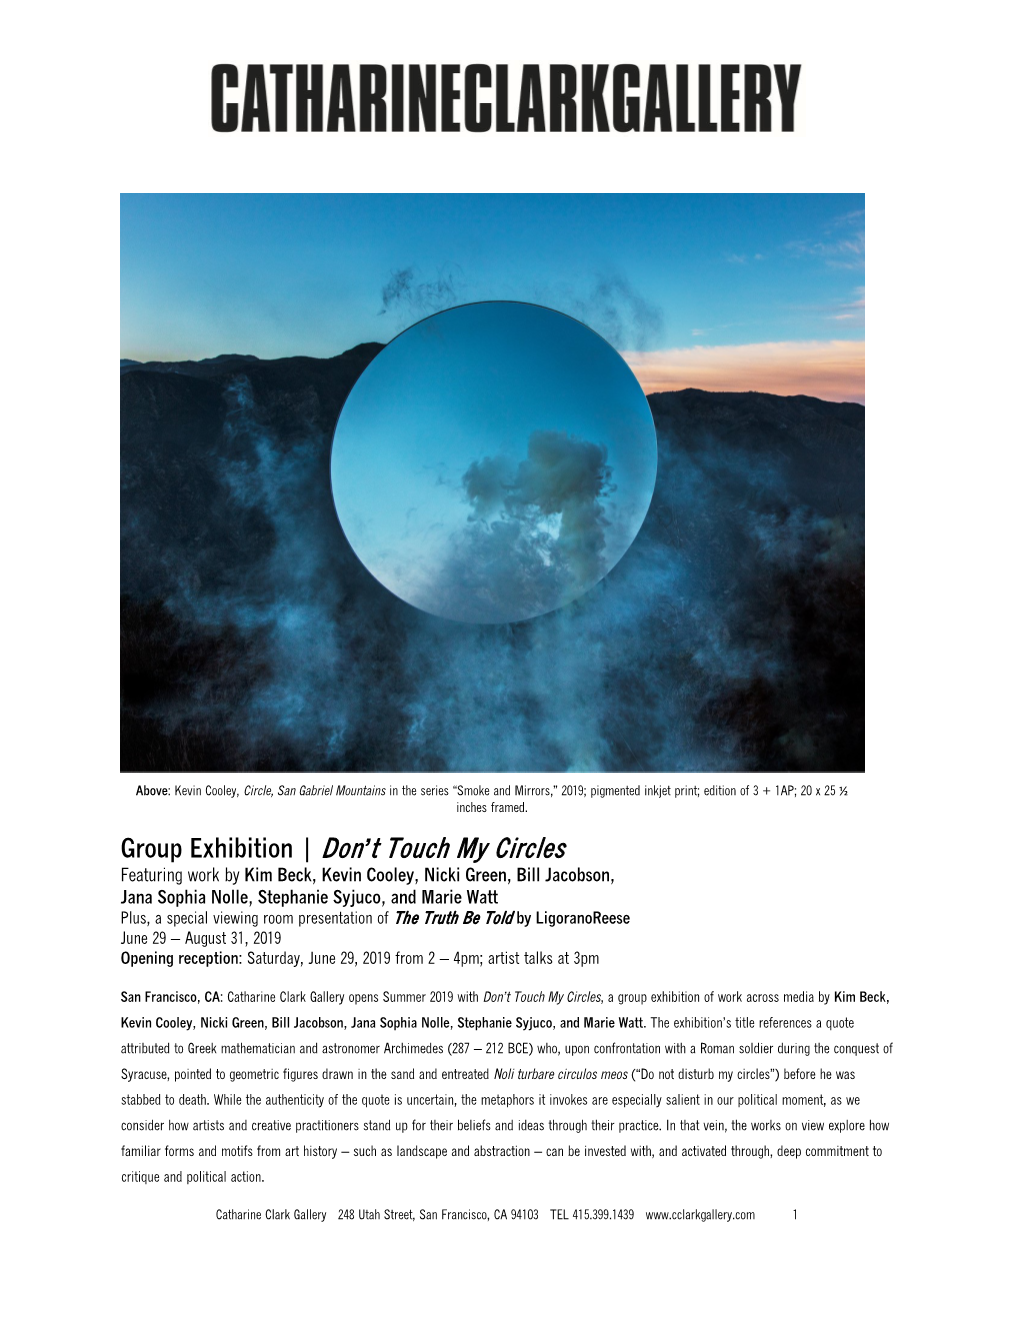 Group Exhibition | Don't Touch My Circles